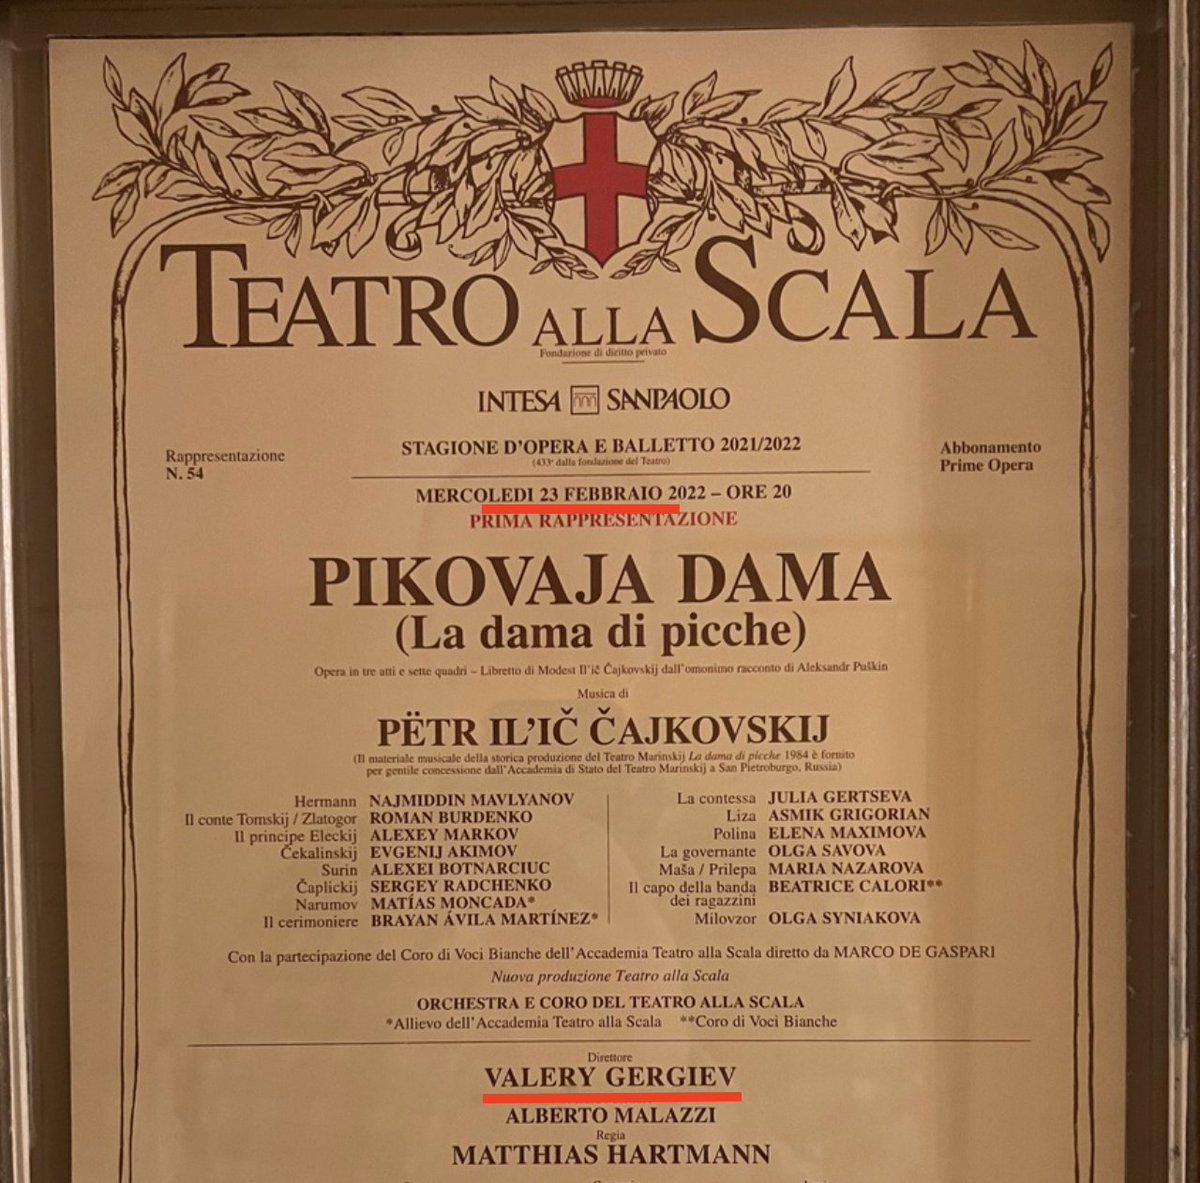 On 23 February 2022 Gergiev hosted a premier of La Dame de pique at La Scala. I actually was there on that day. Gergiev was wonderfully received, there were standing ovations and words of gratitude. At the very same hour, Putin started to bomb Ukrainian cities.